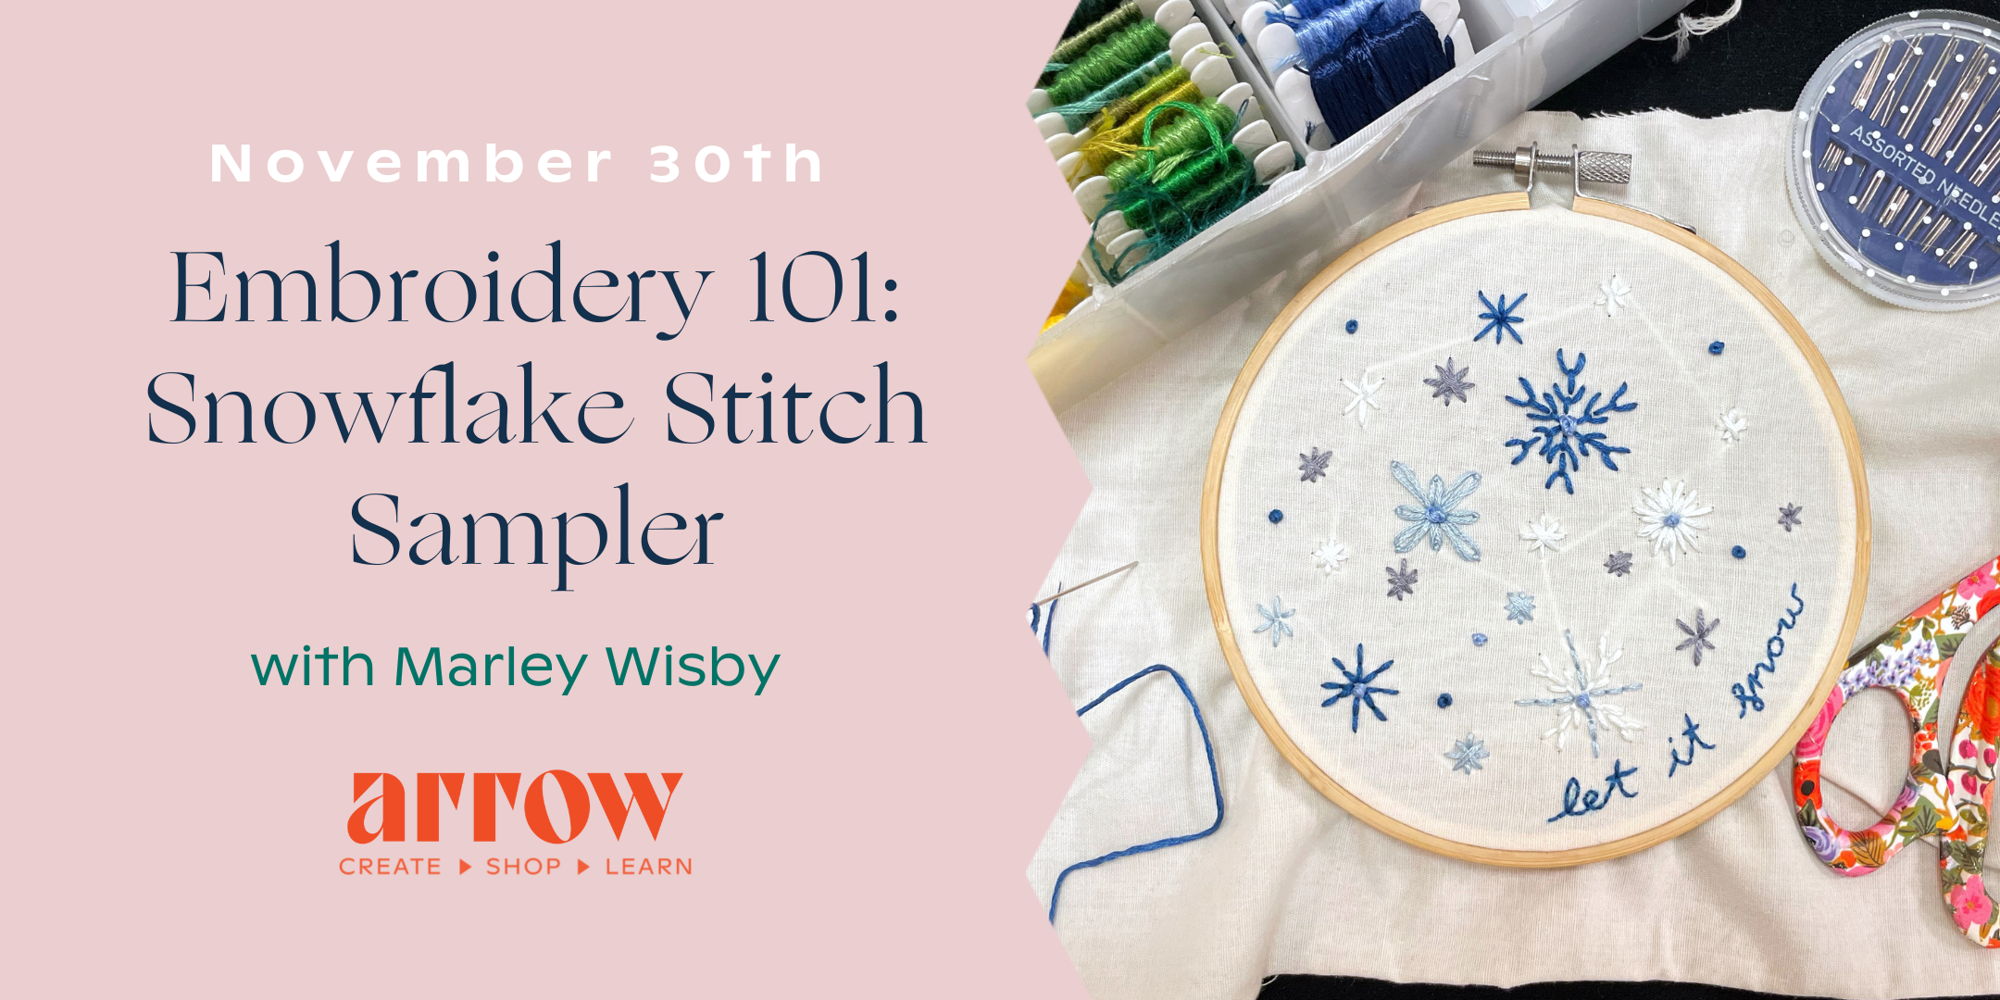 Embroidery 101: Snowflake Stitch Sampler with Marley Wisby promotional image